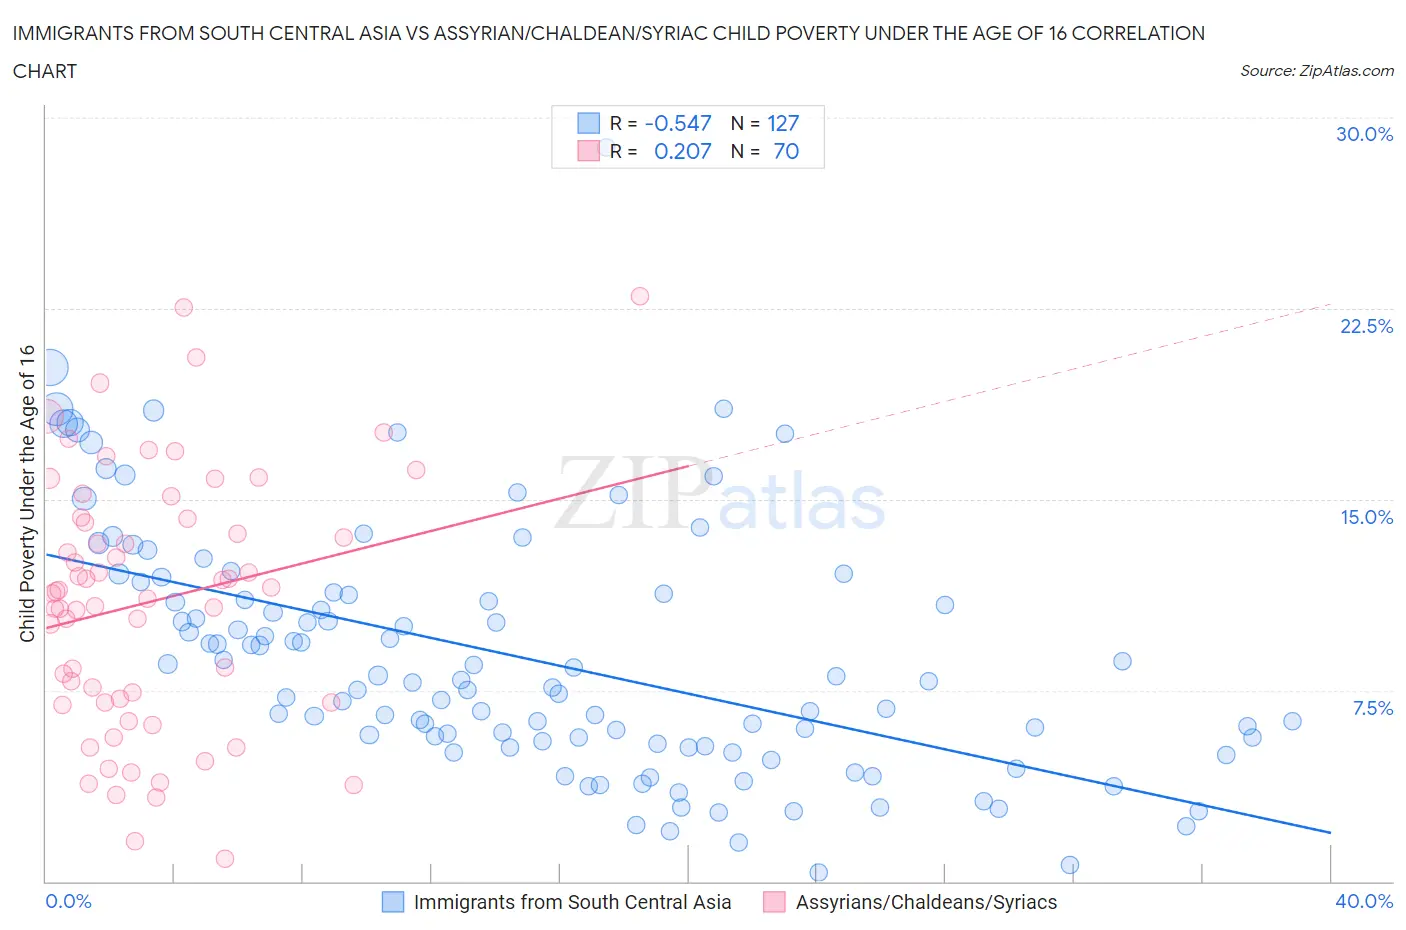 Immigrants from South Central Asia vs Assyrian/Chaldean/Syriac Child Poverty Under the Age of 16